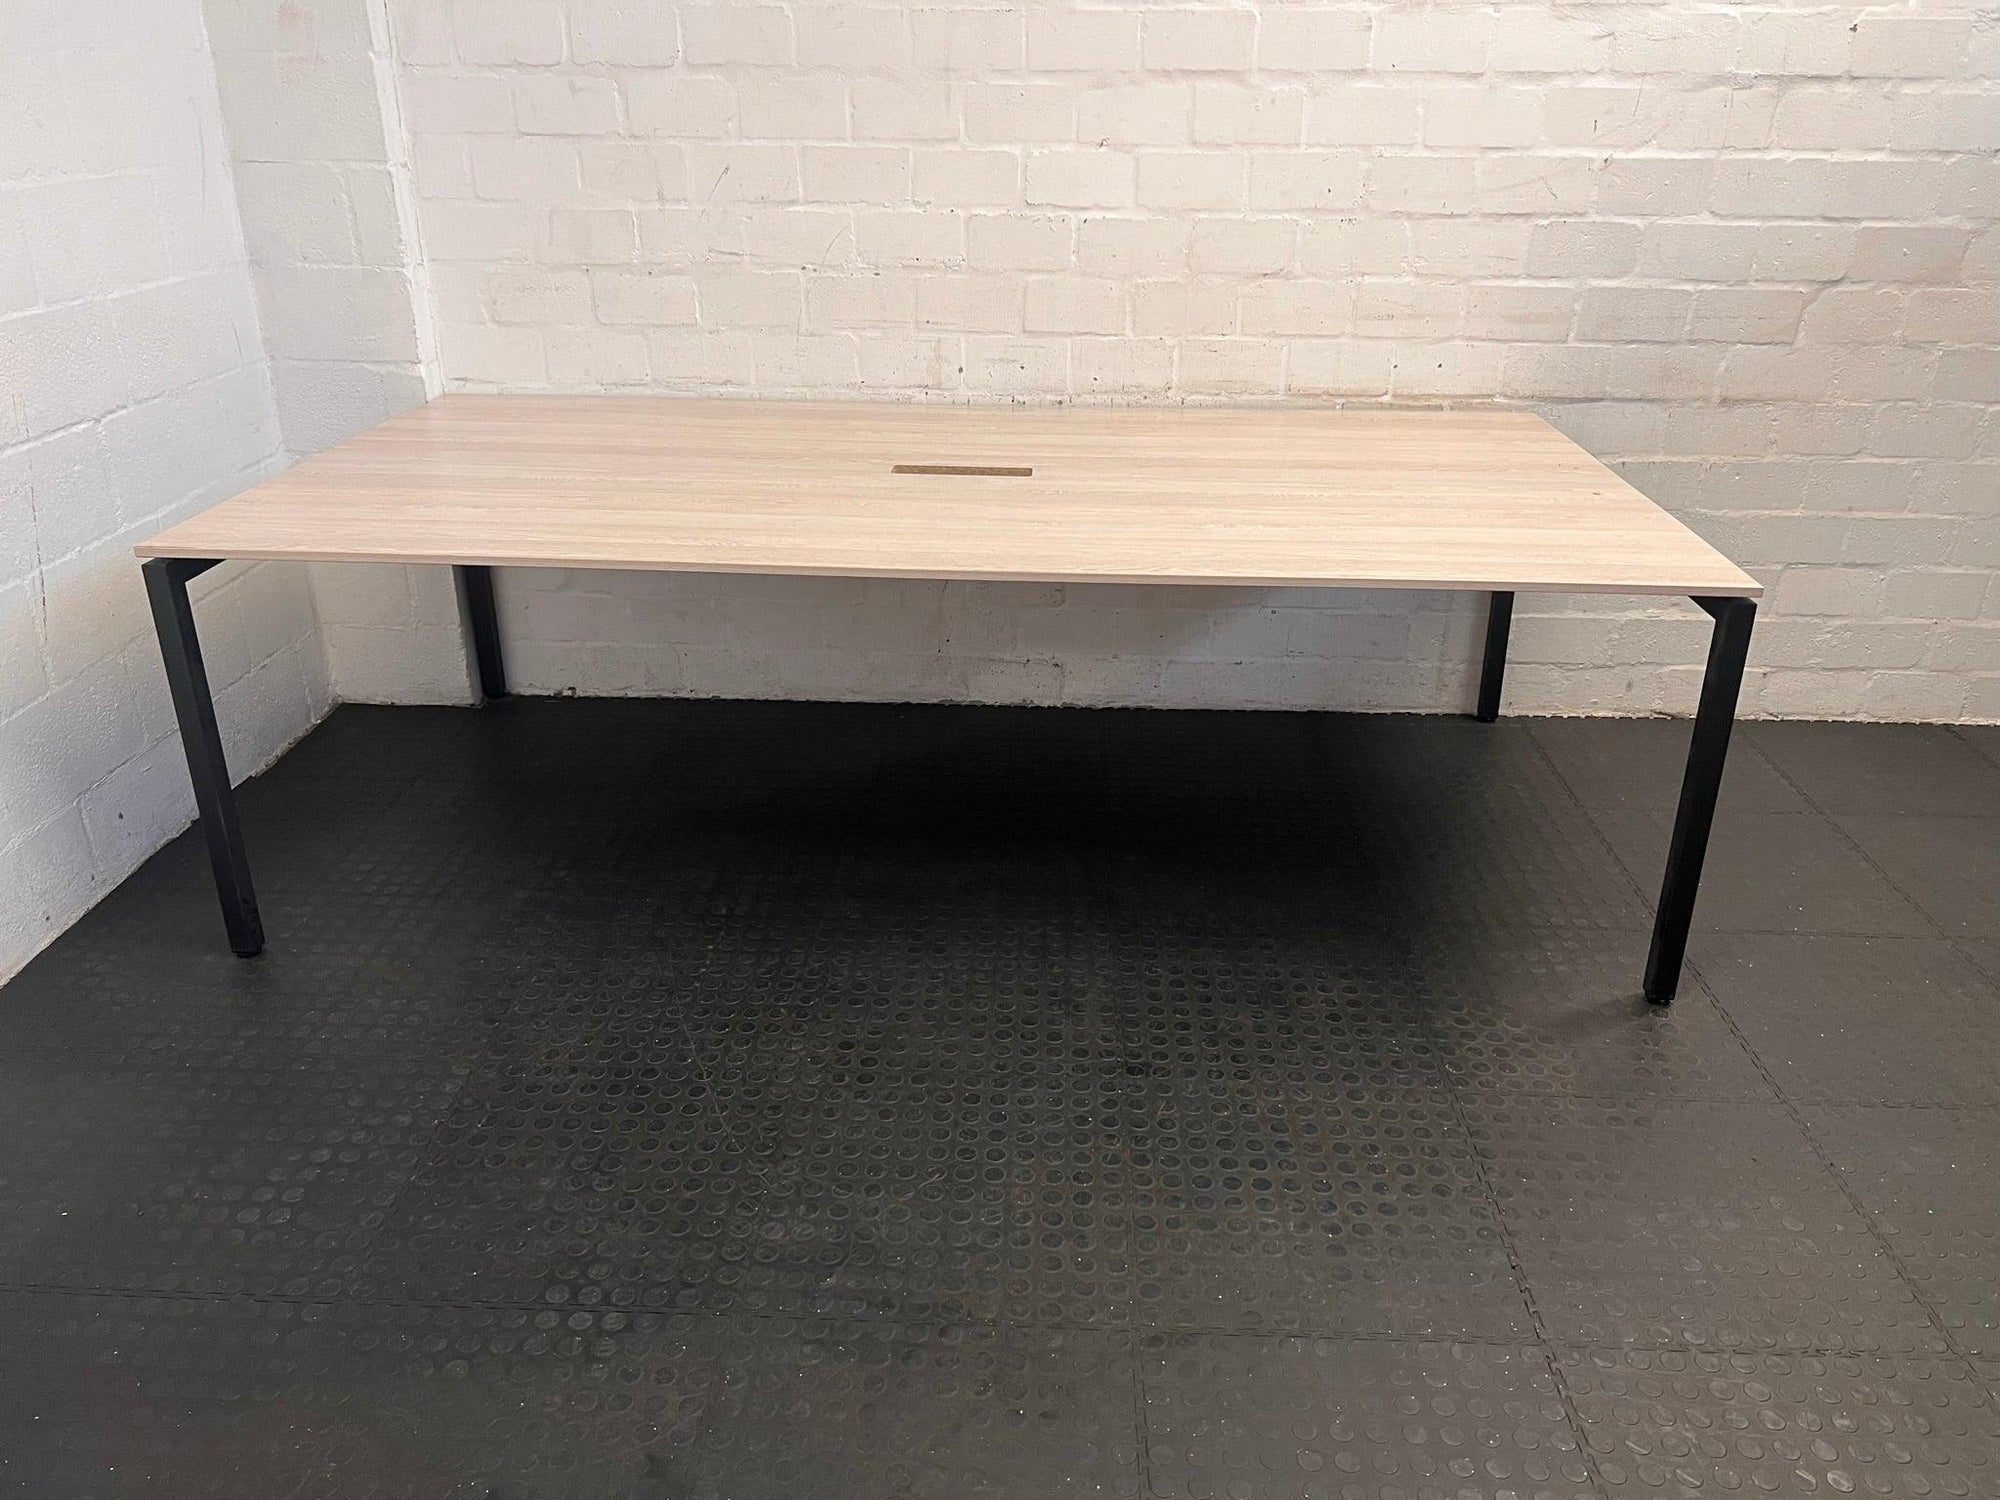 Cream Pine Boardroom Table with Black Legs (2.4 x 1.2m) - REDUCED